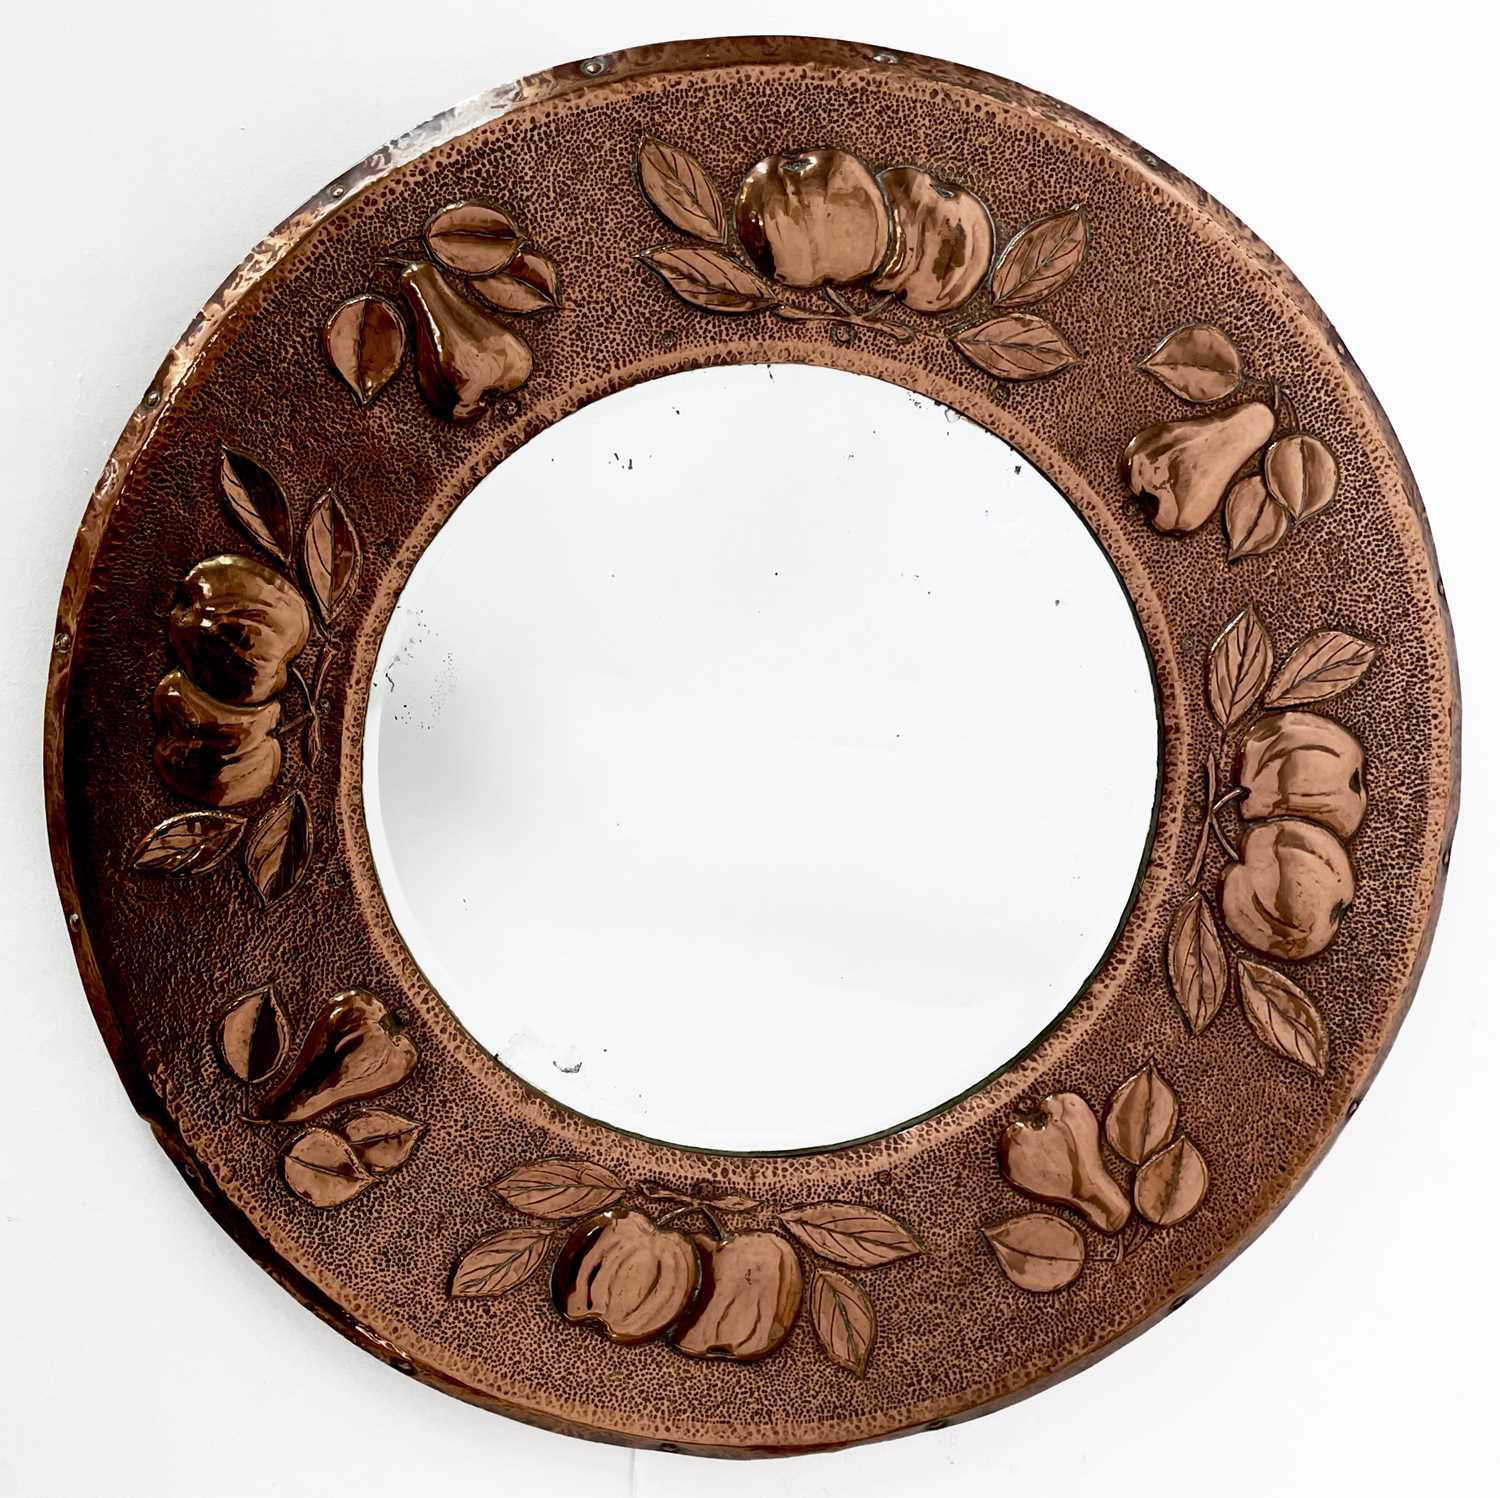 An early Newlyn copper circular wall mirror, circa 1900, repousse decorated with pears and medlars